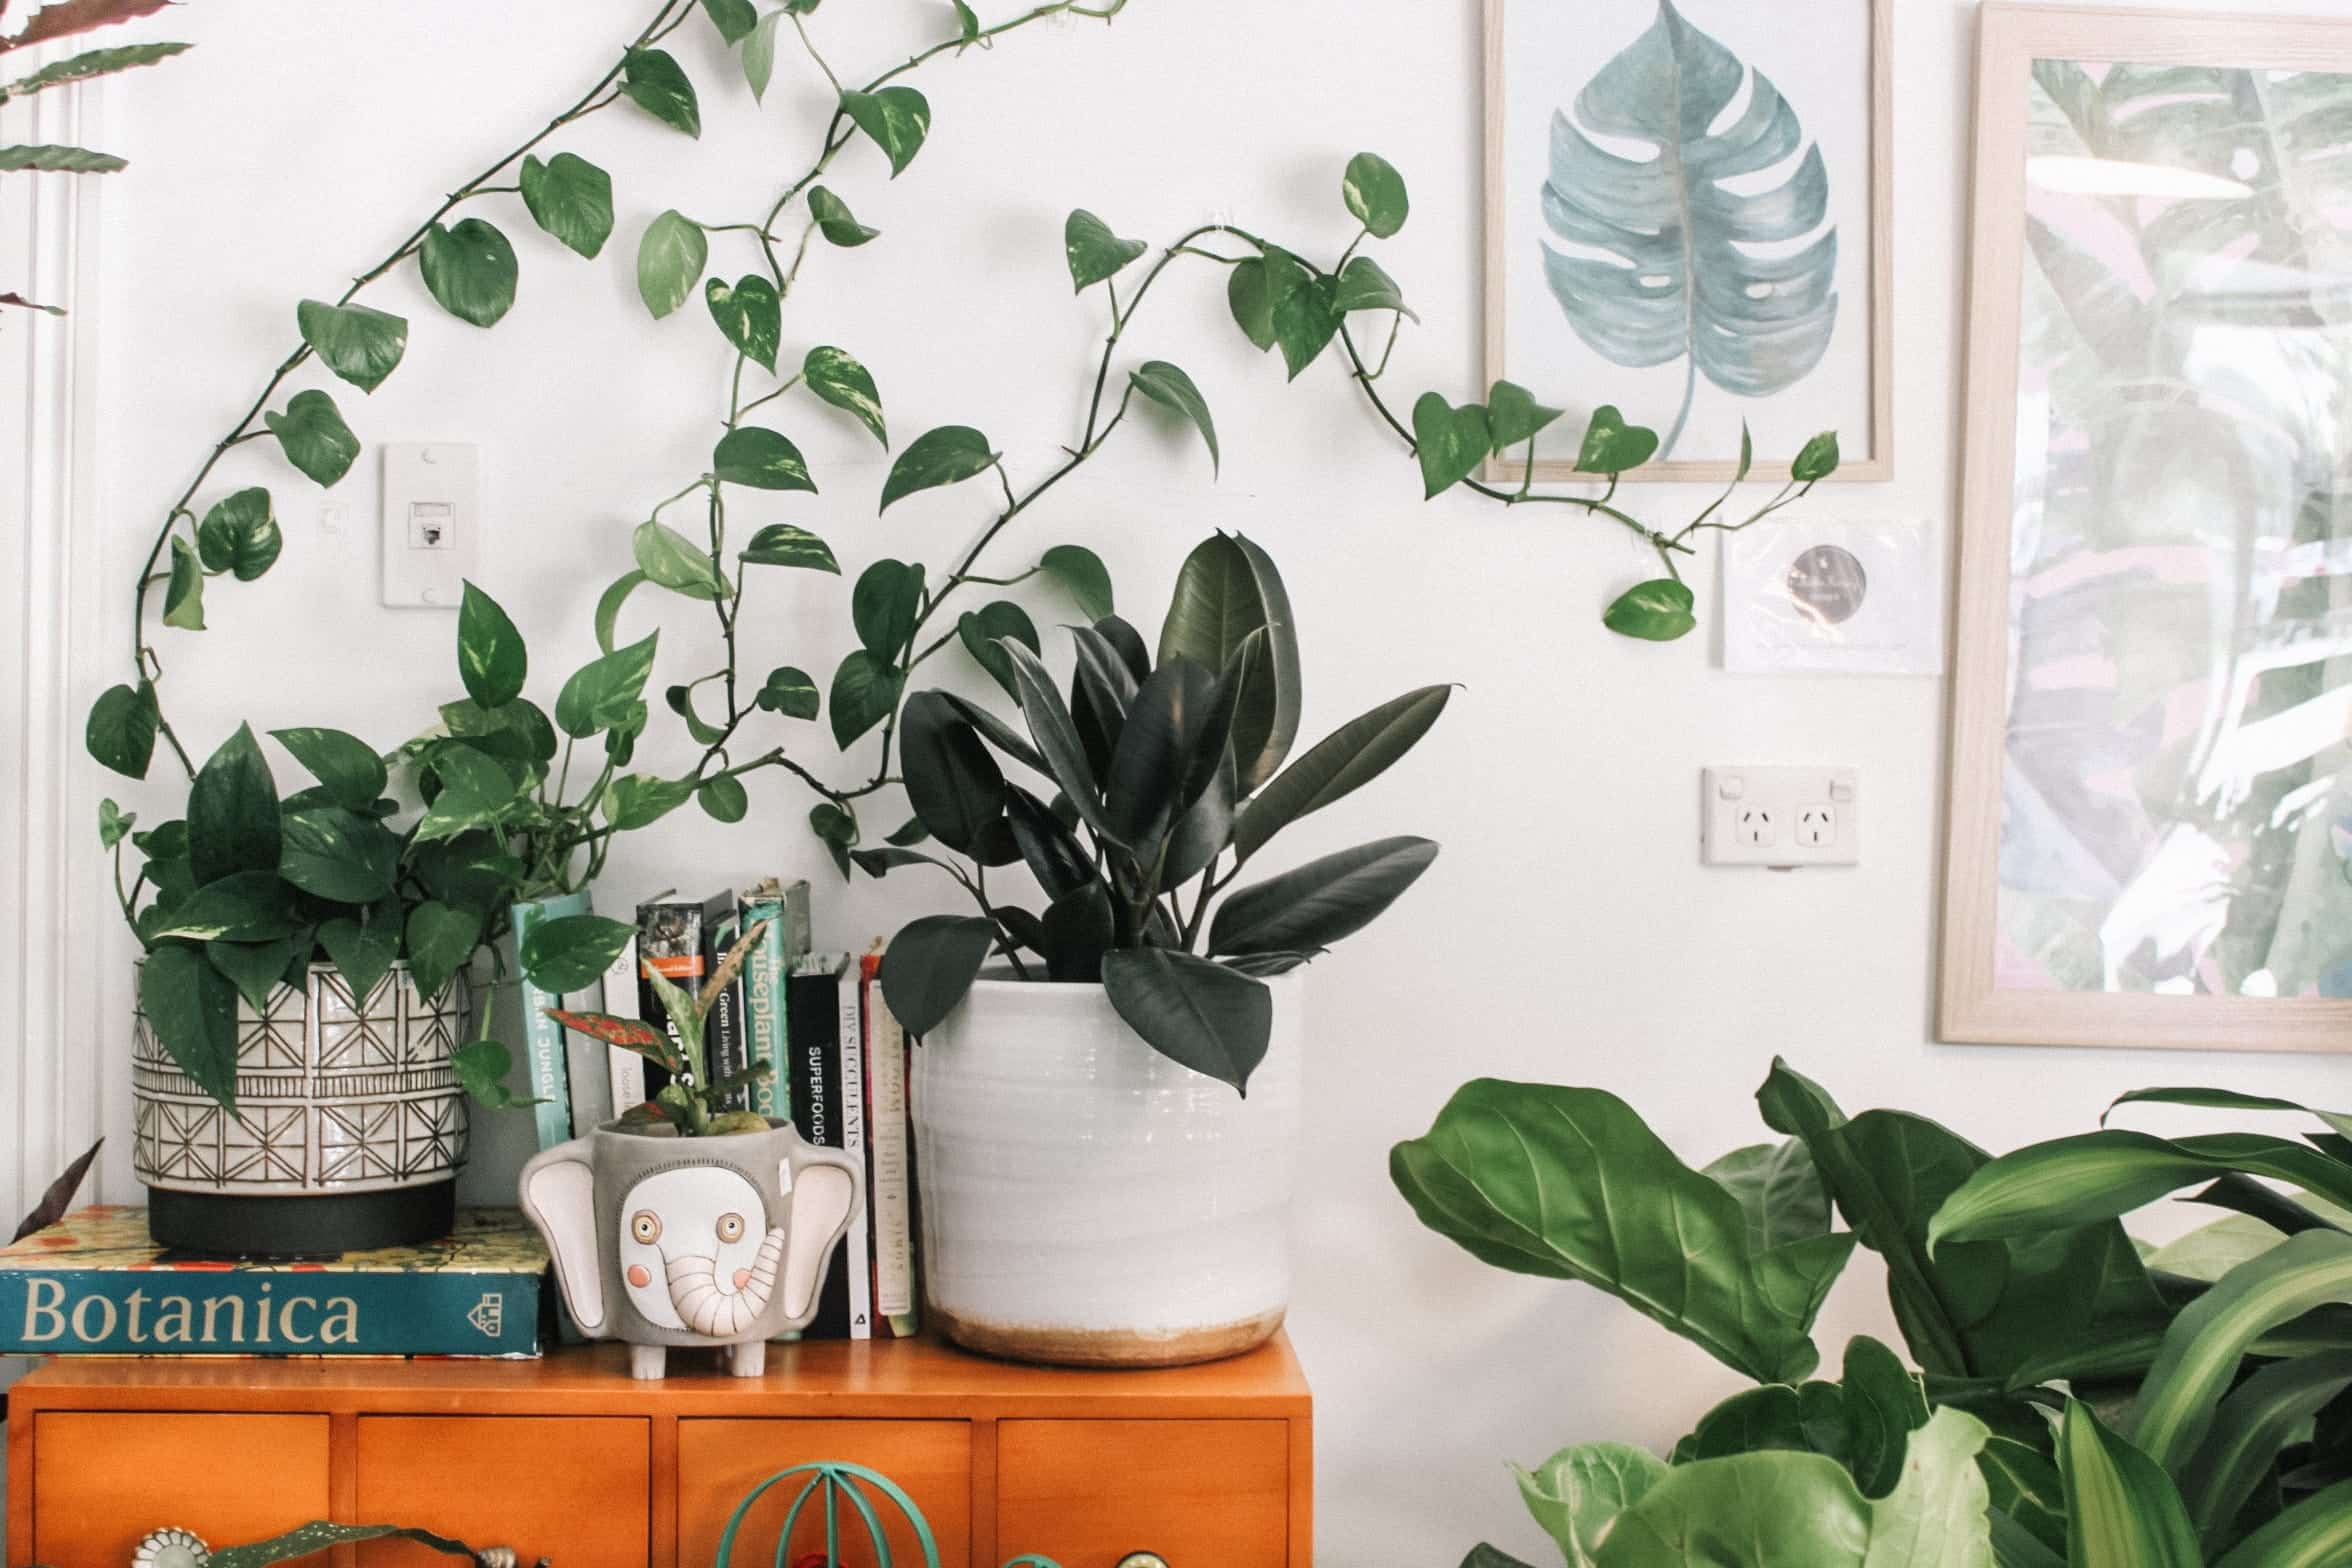 5 Air-Purifying Plants to Clean The Air in Your Home